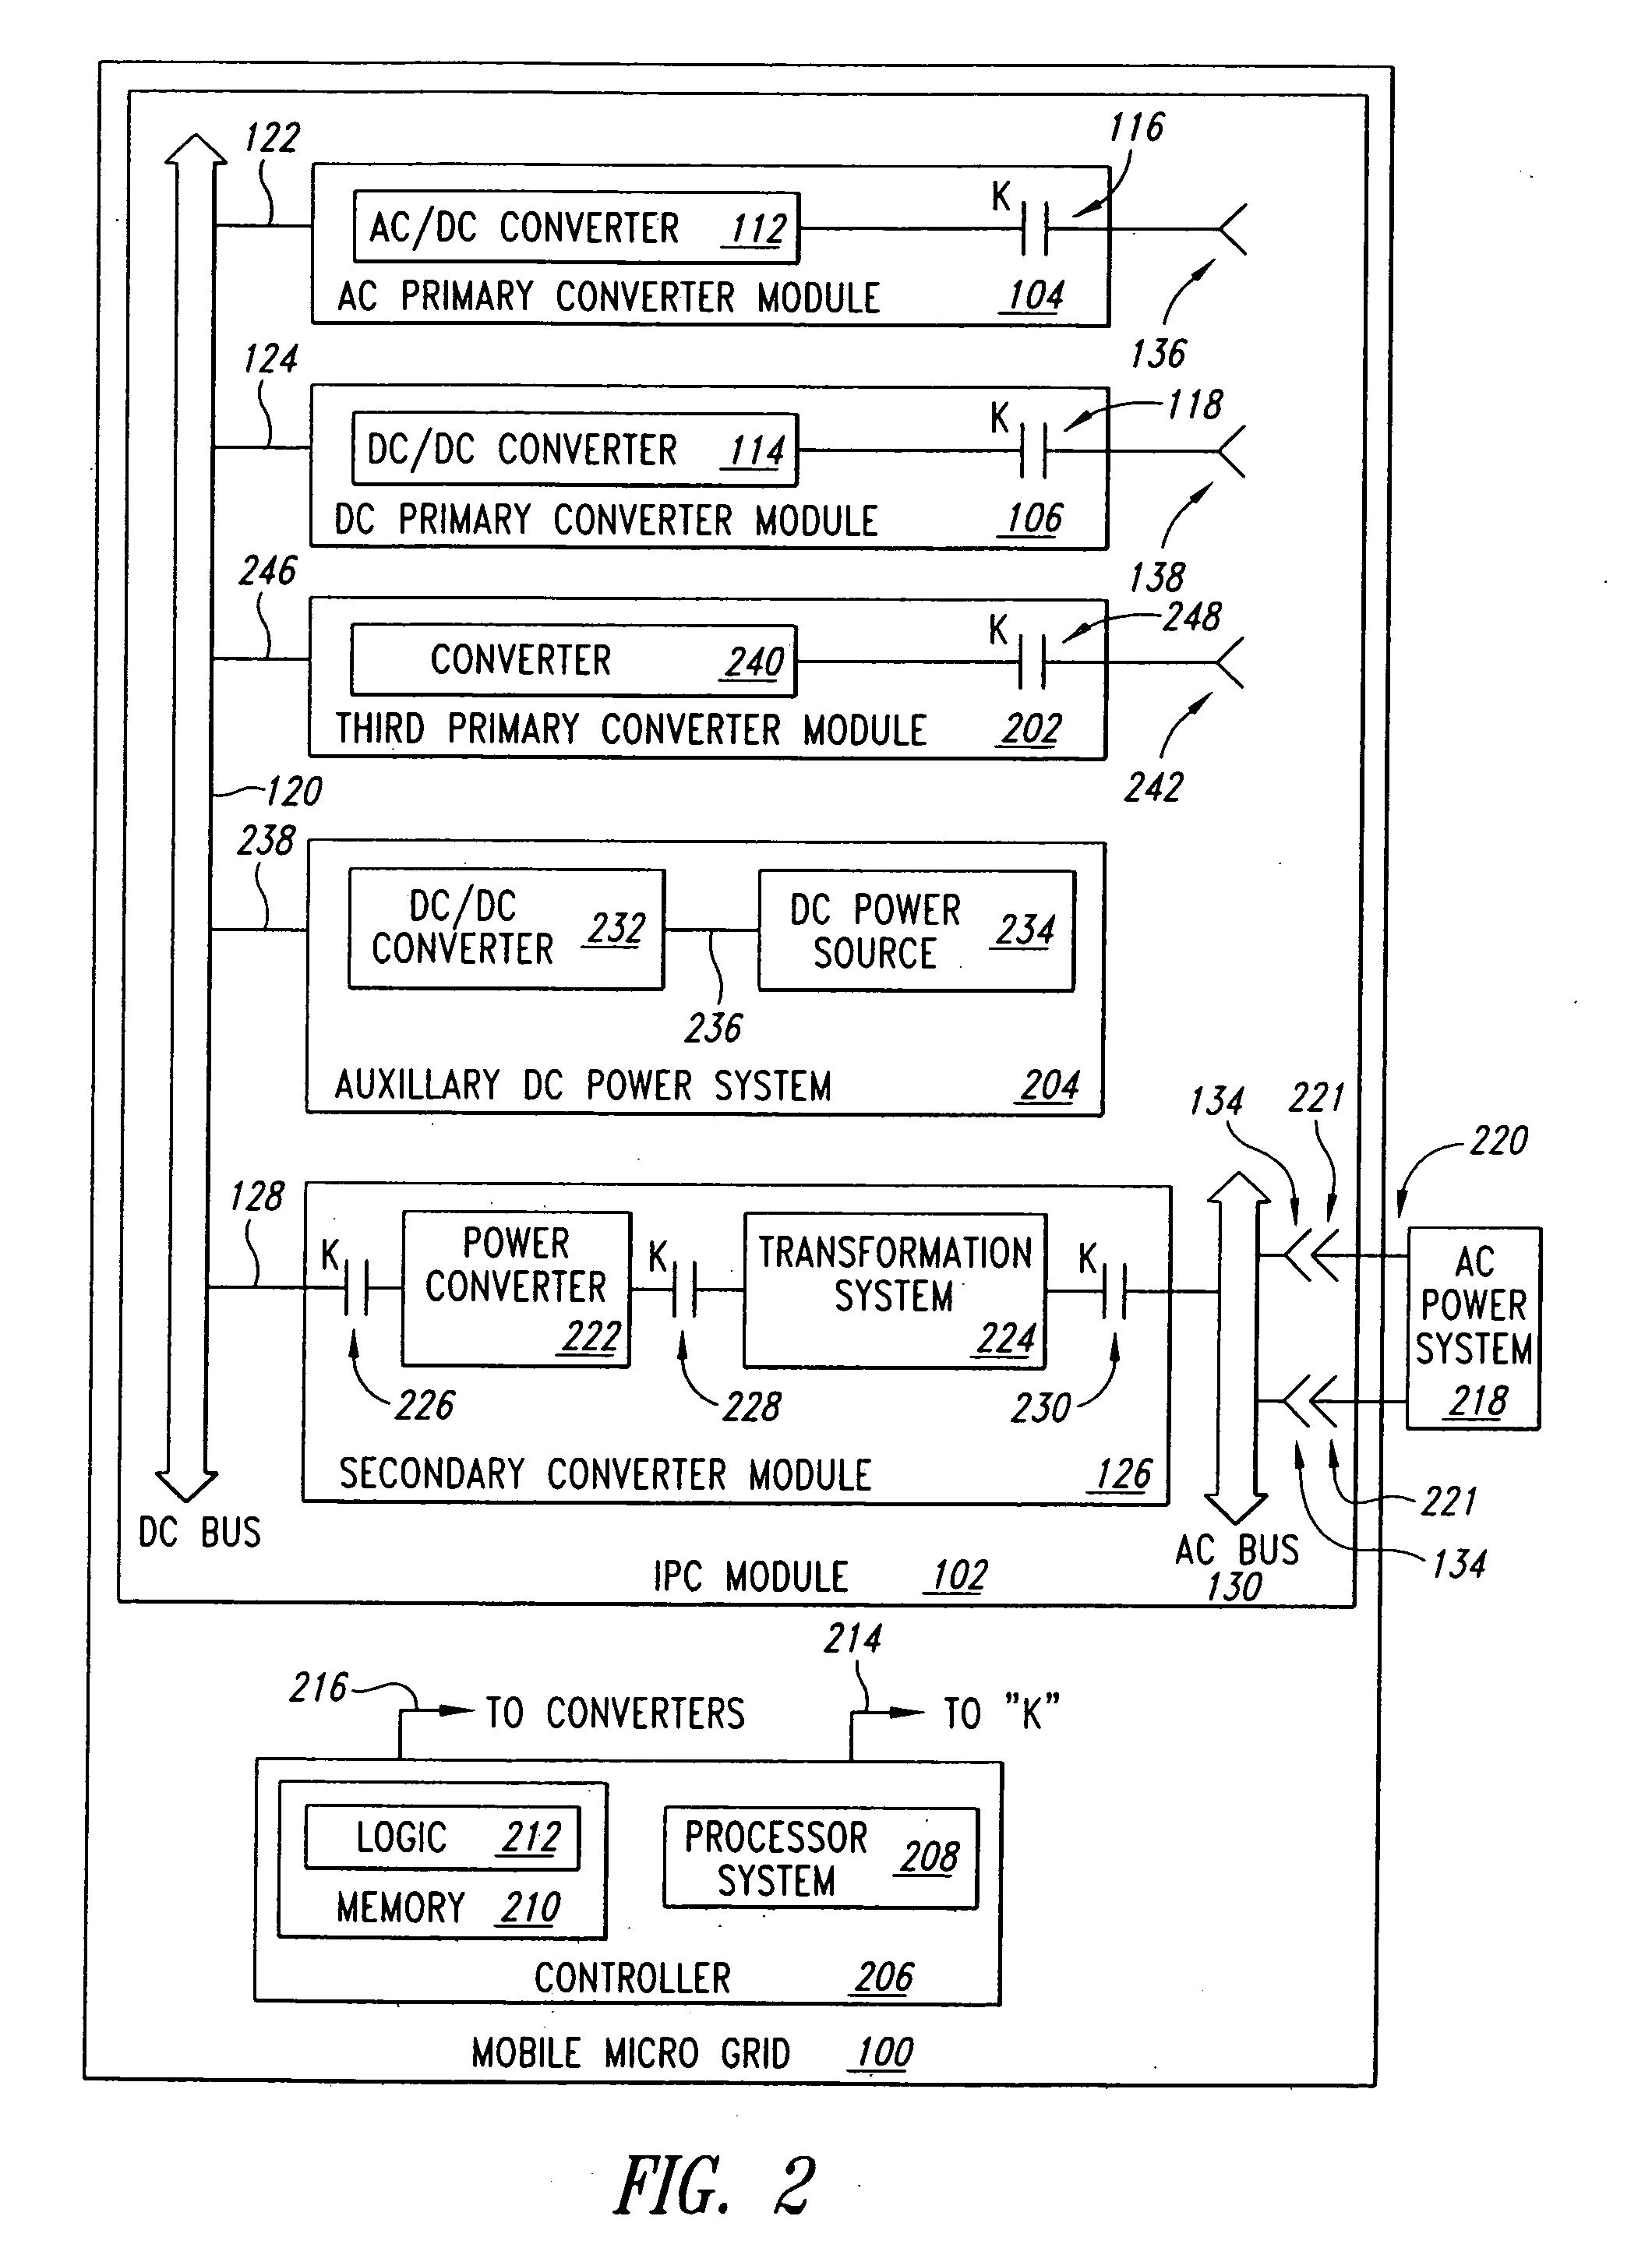 System and method for controlling power flow in a power system